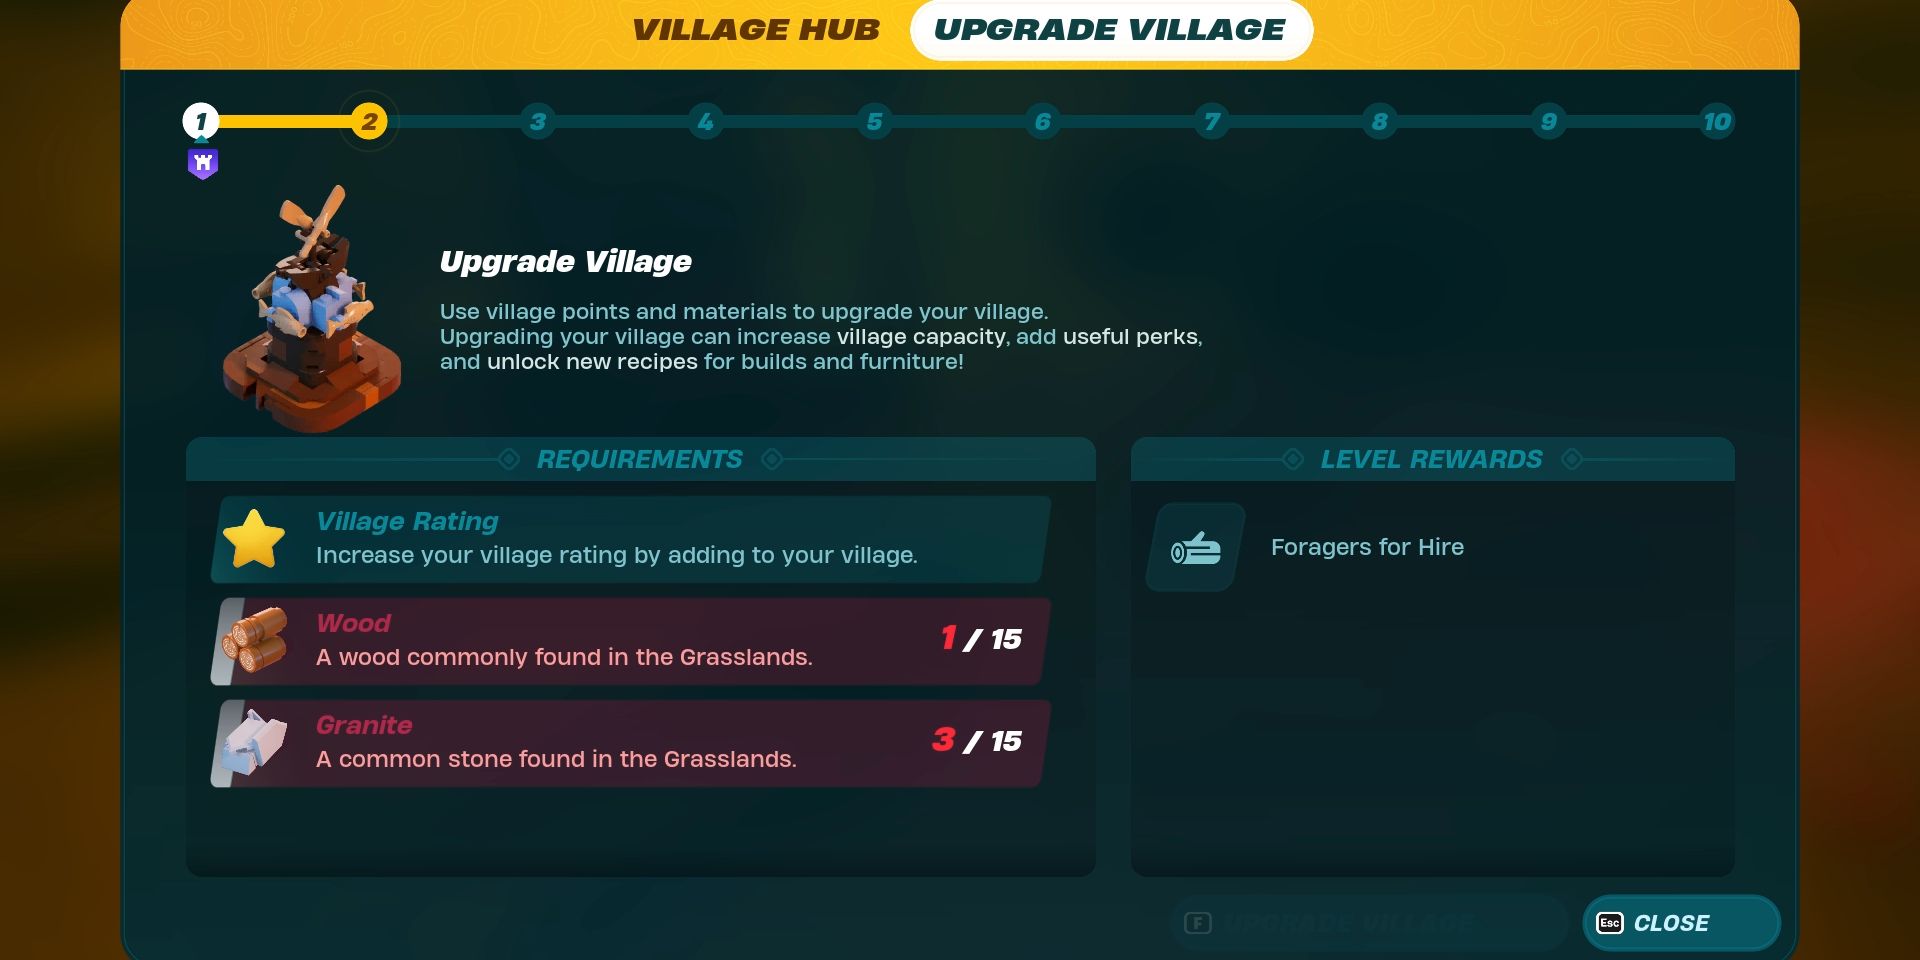 The Upgrade Village tab in Lego Fortnite shows the Level Requirements and Rewards for Level 2.